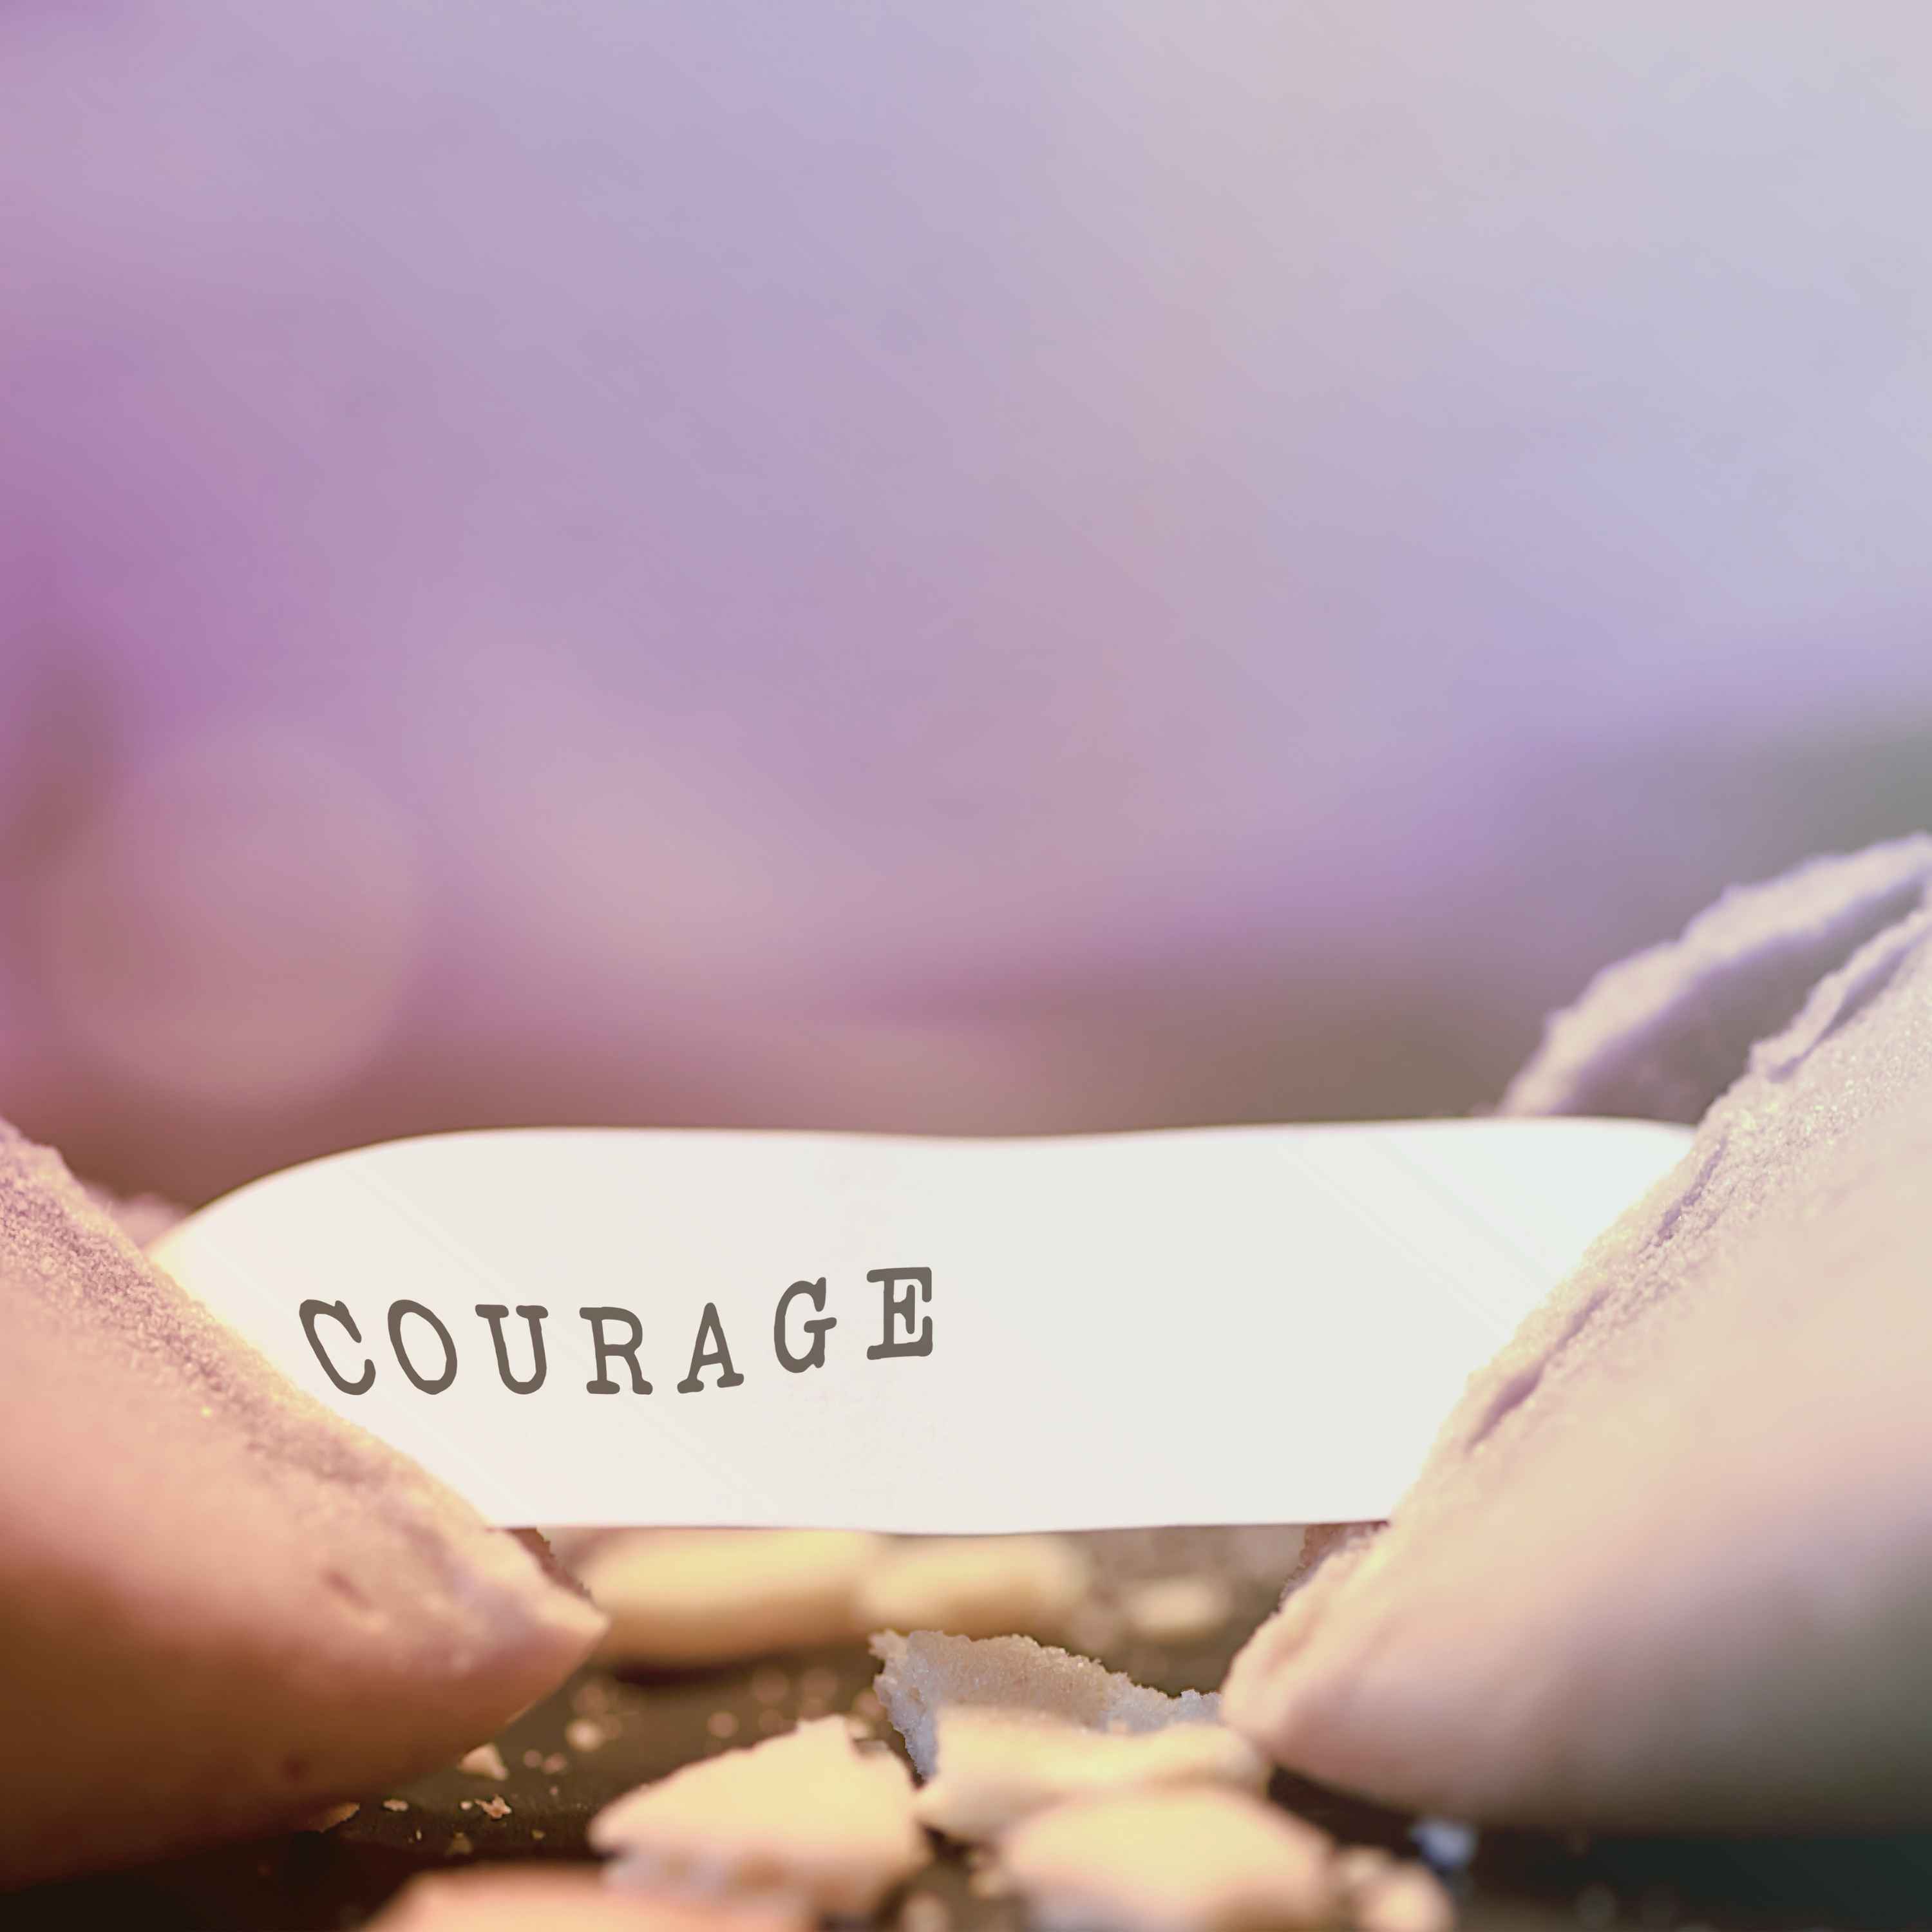 Find the Courage to be Patient 